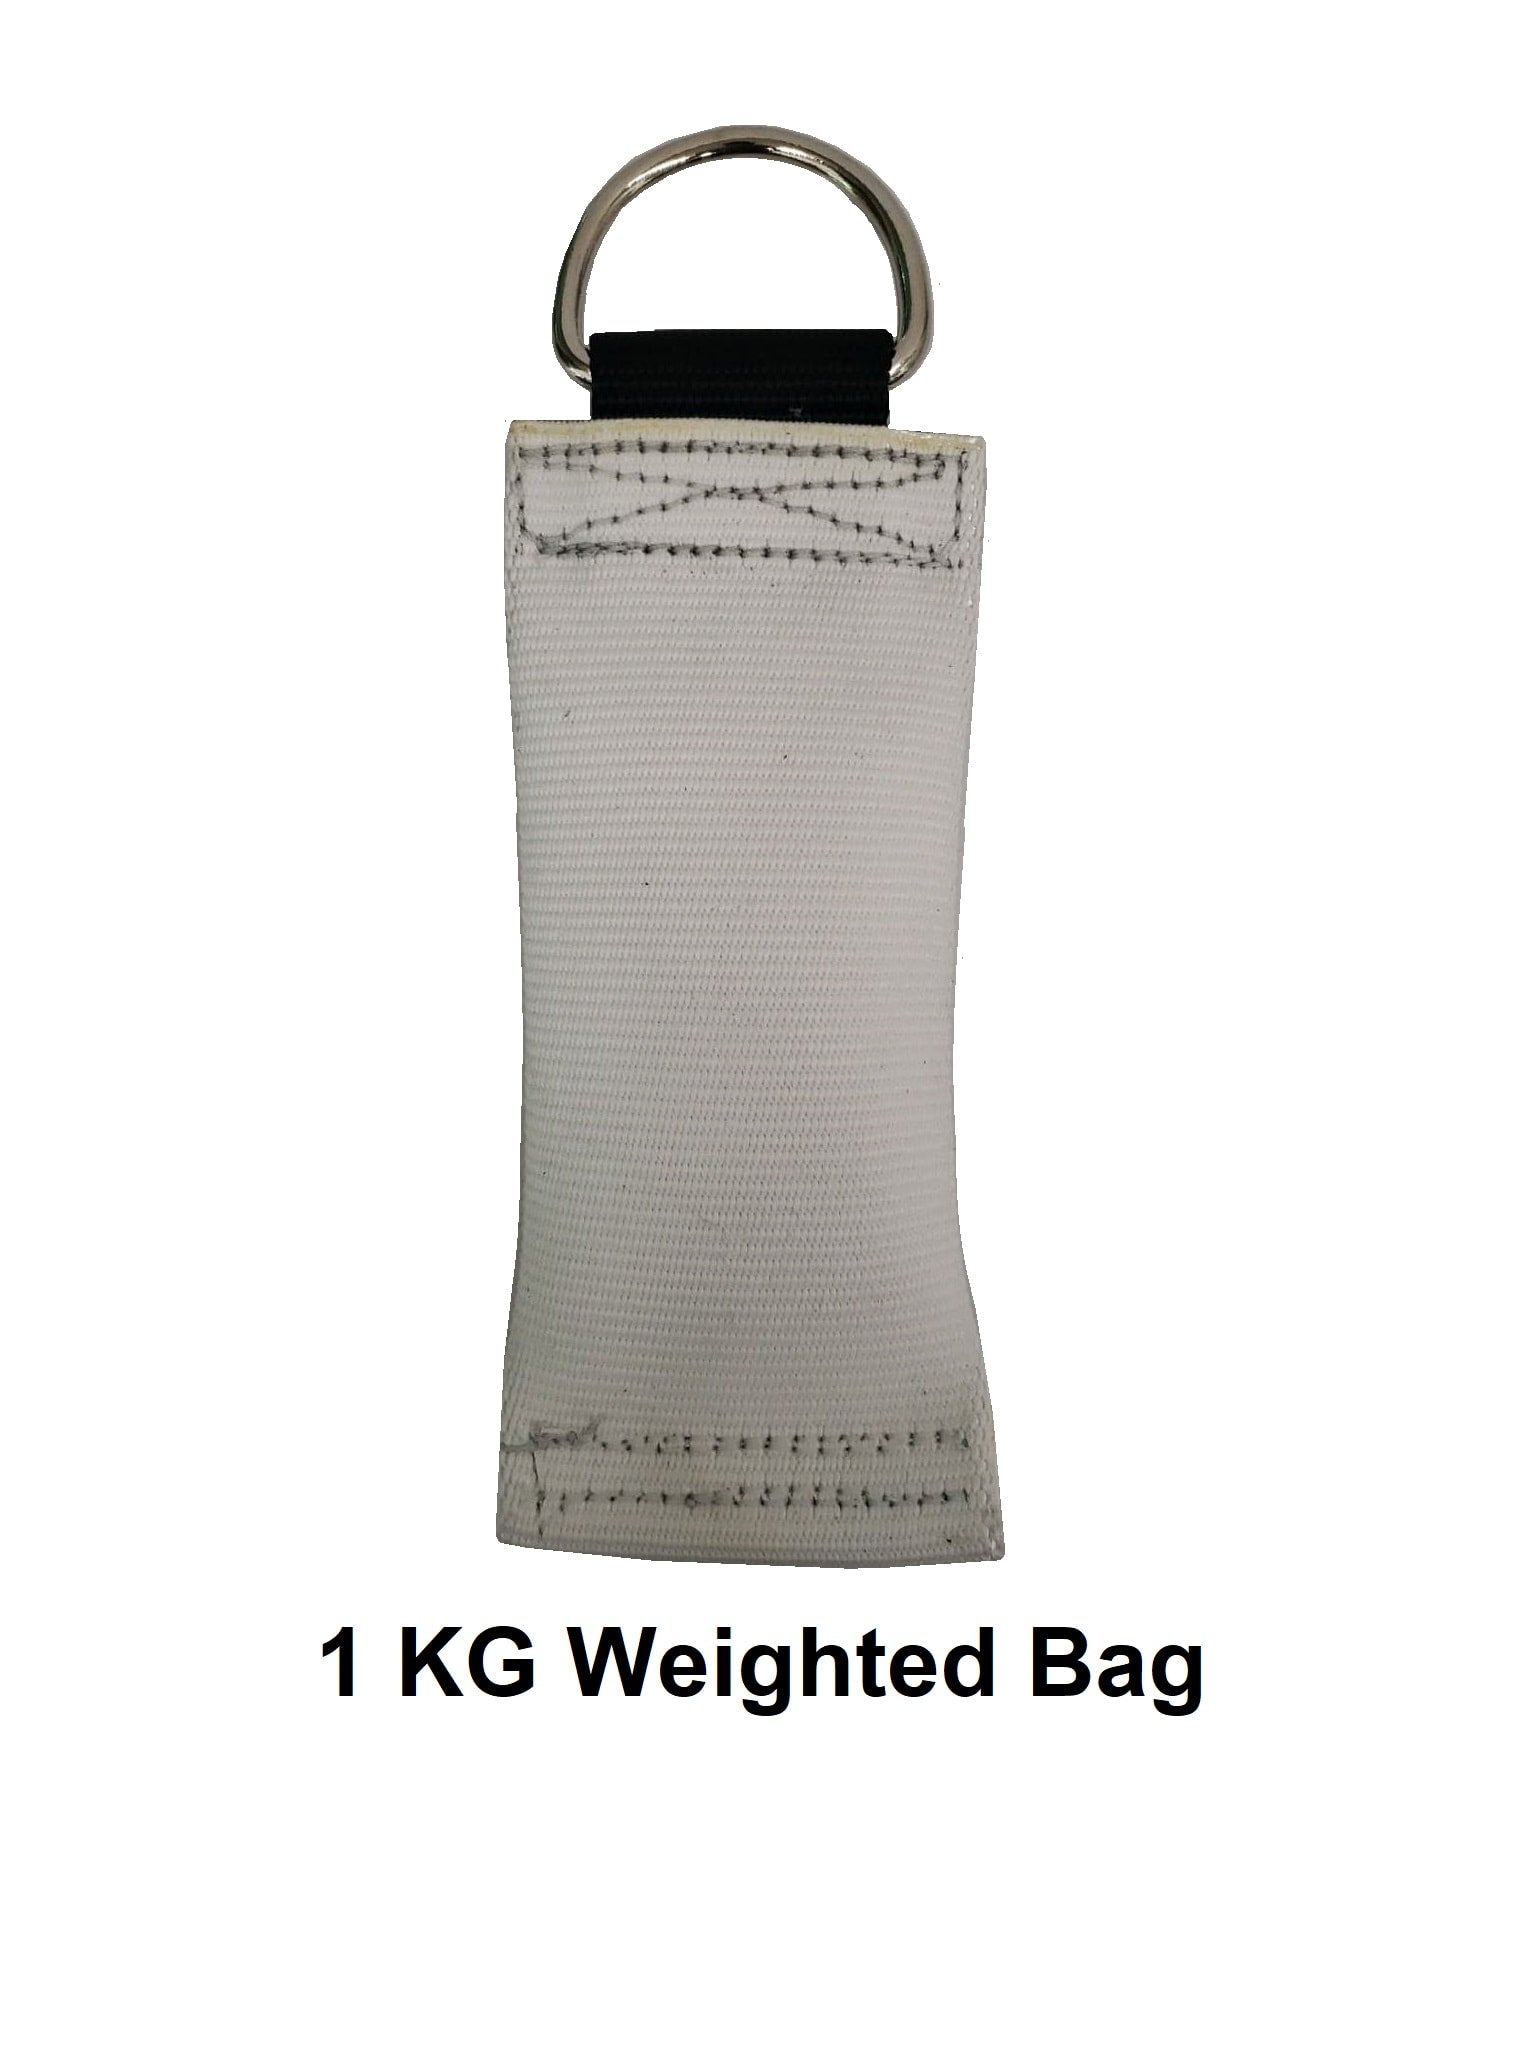 1 KG Weighted Sack